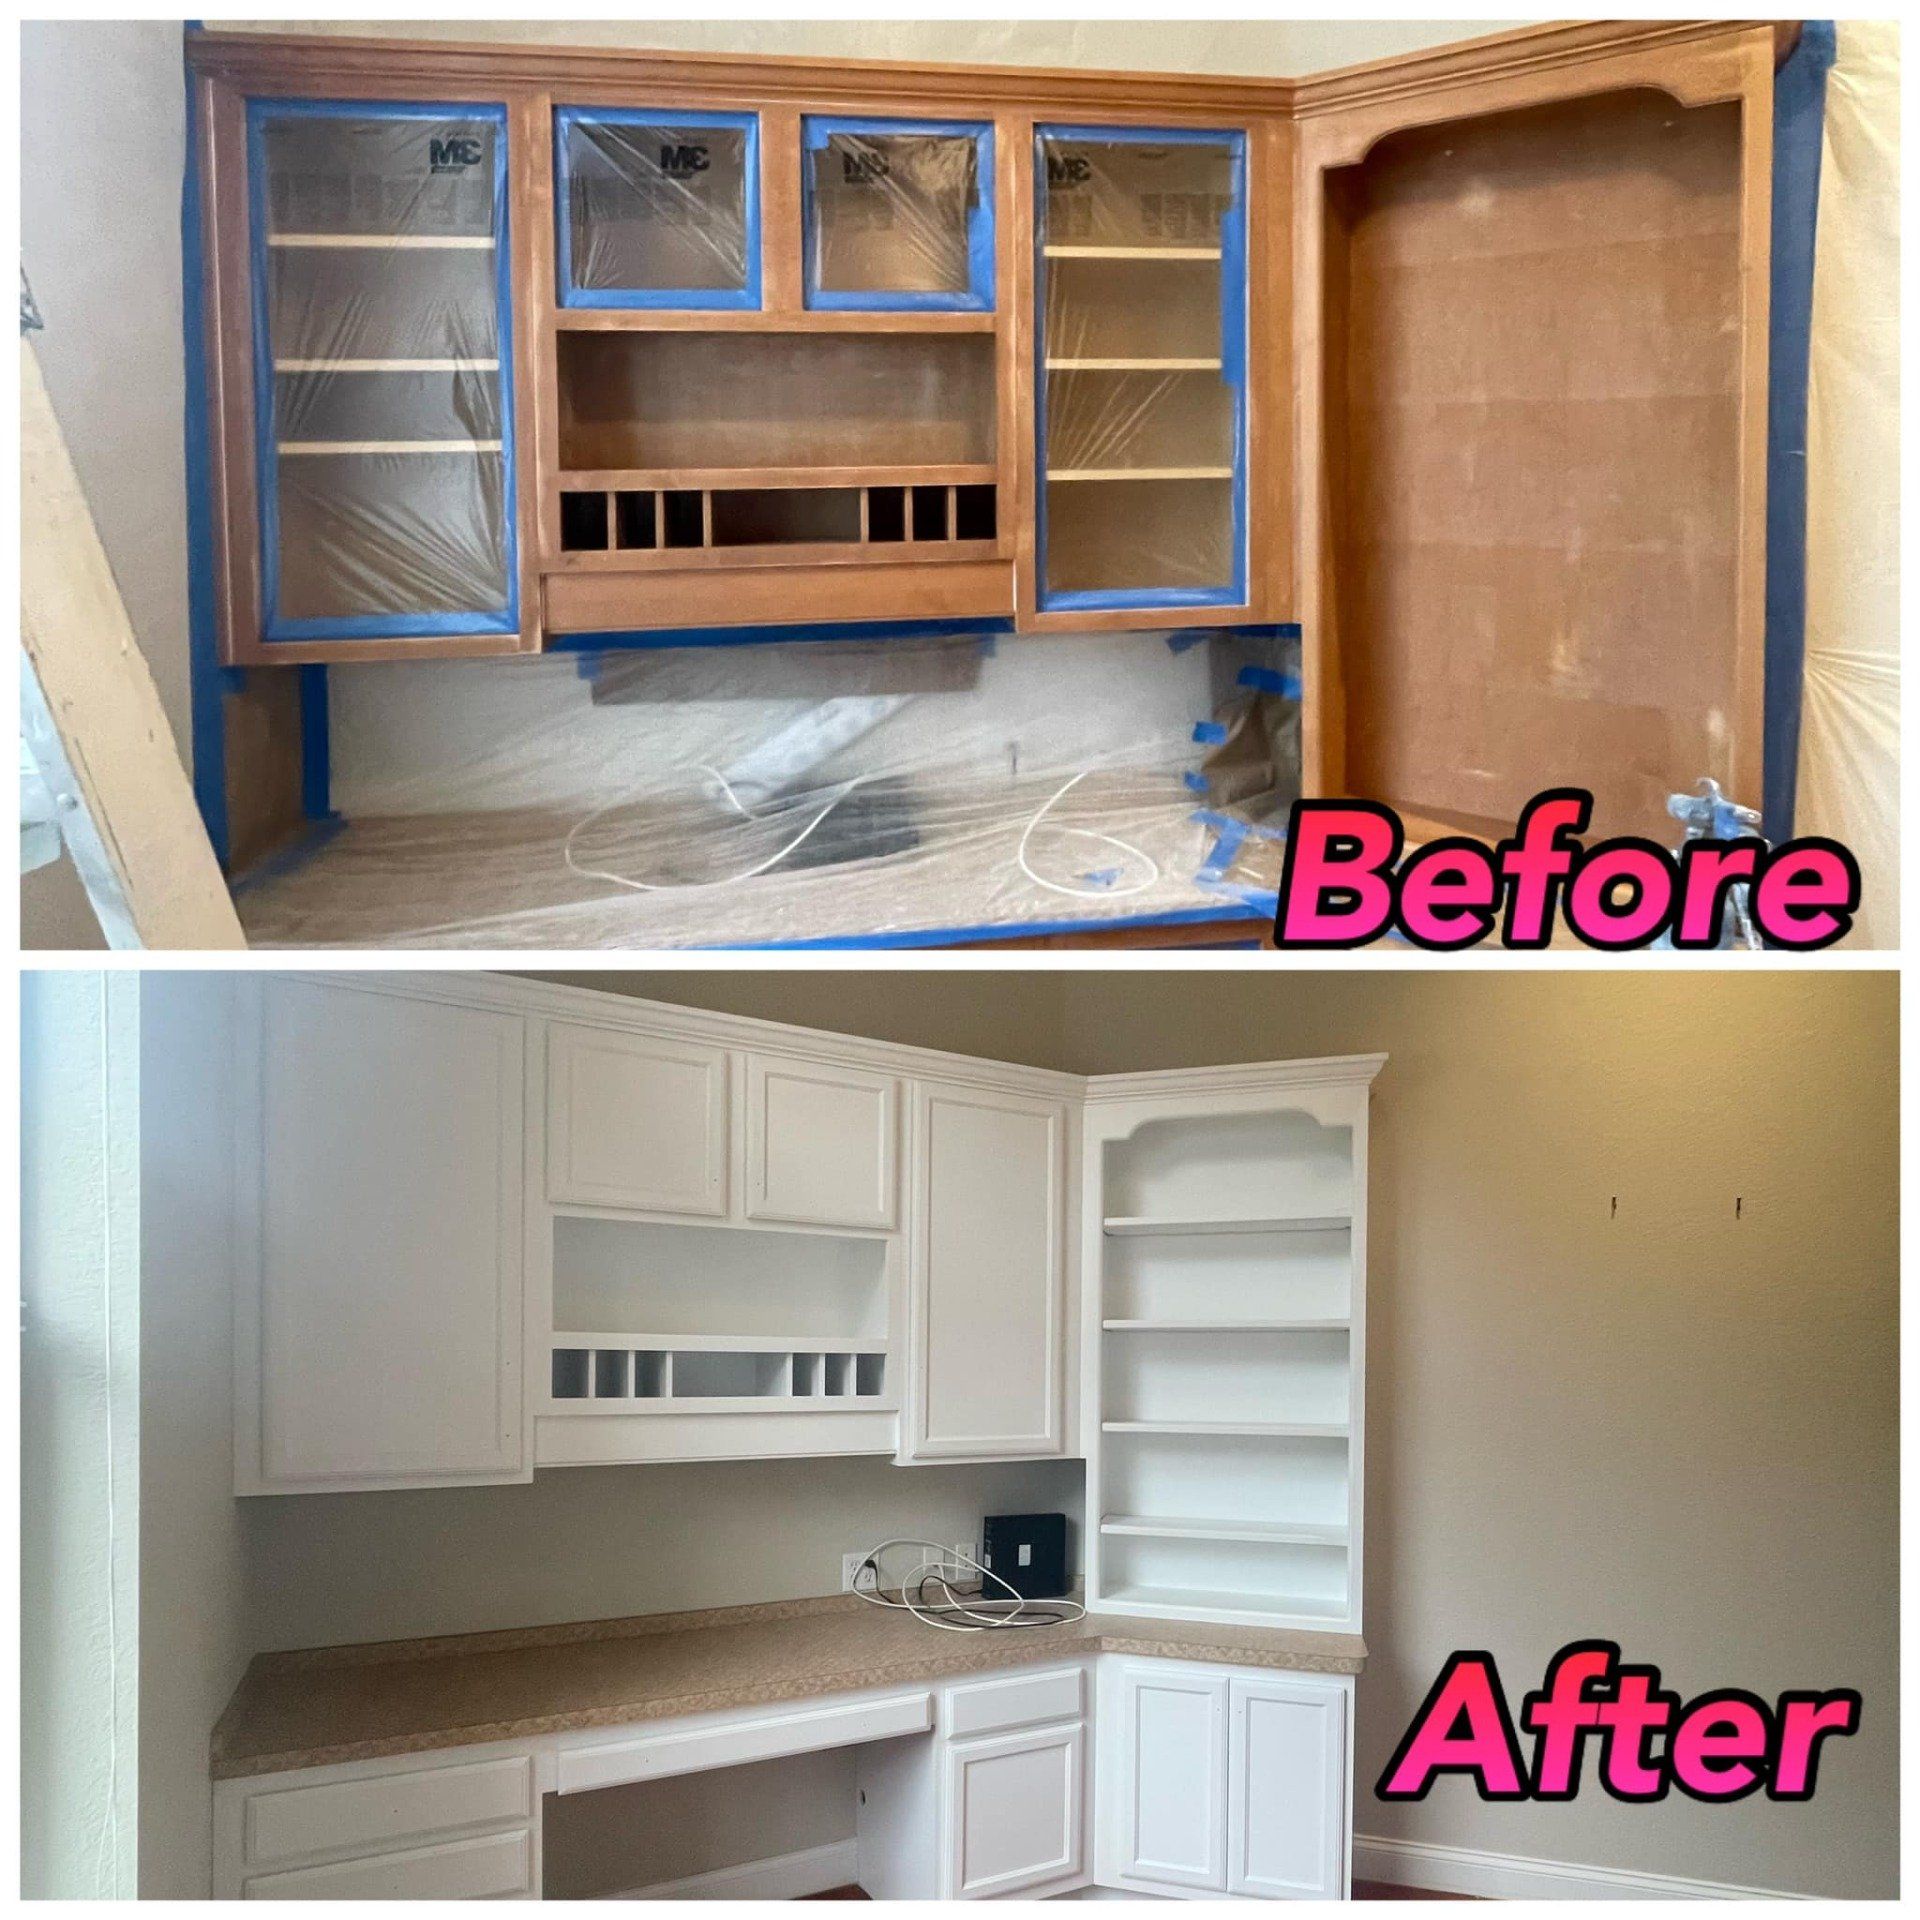 A before and after photo of a kitchen cabinet